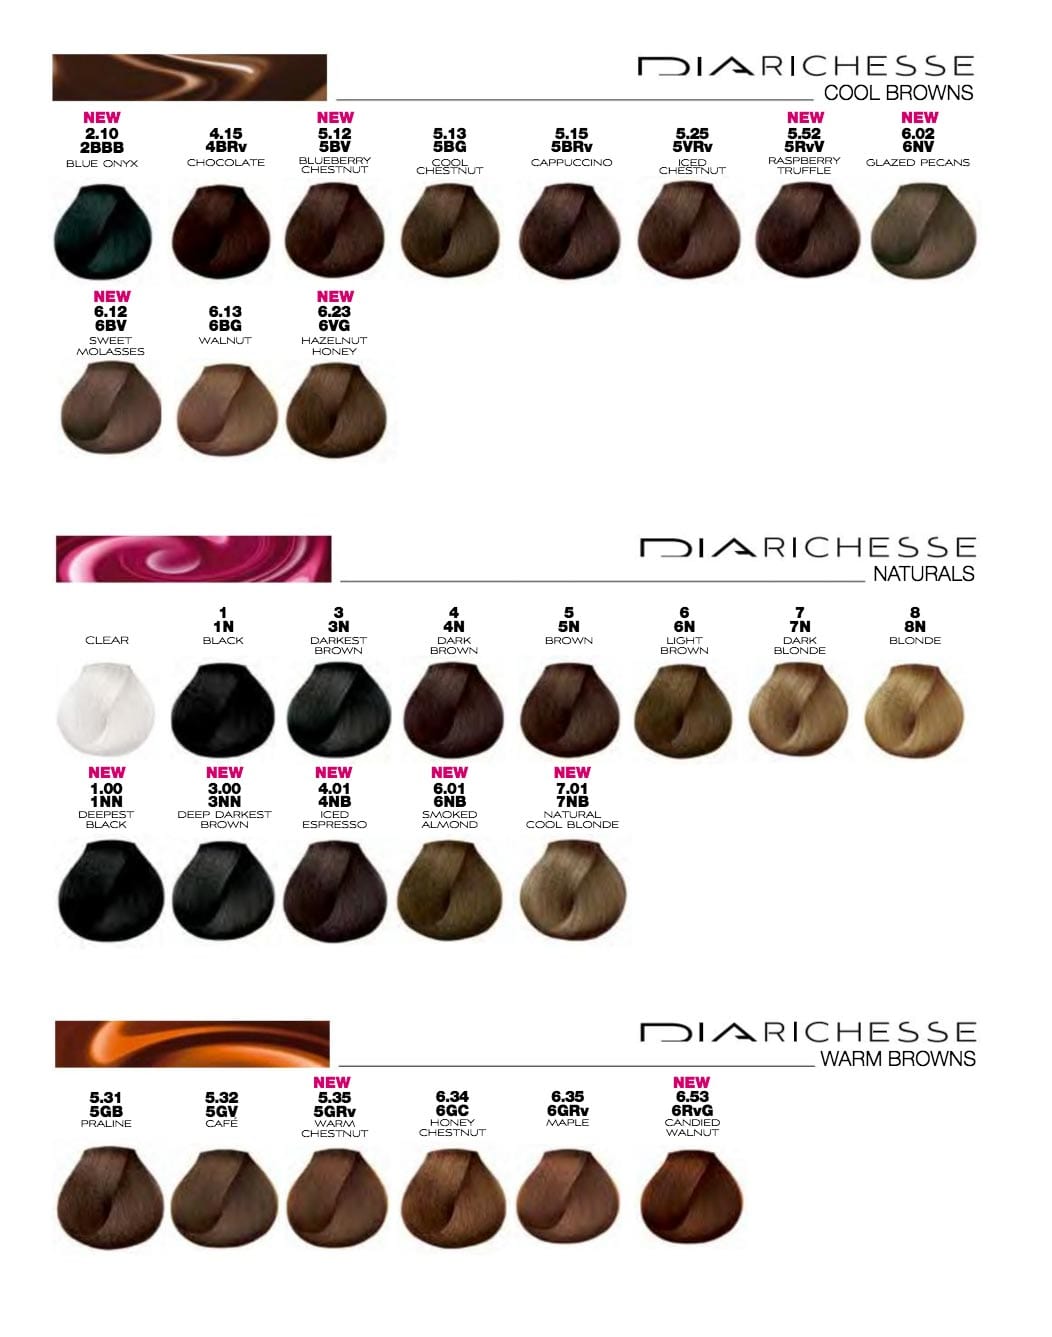 L'OREAL - DIARICHESSE_Diarichesse 5/5N Brown_Cosmetic World